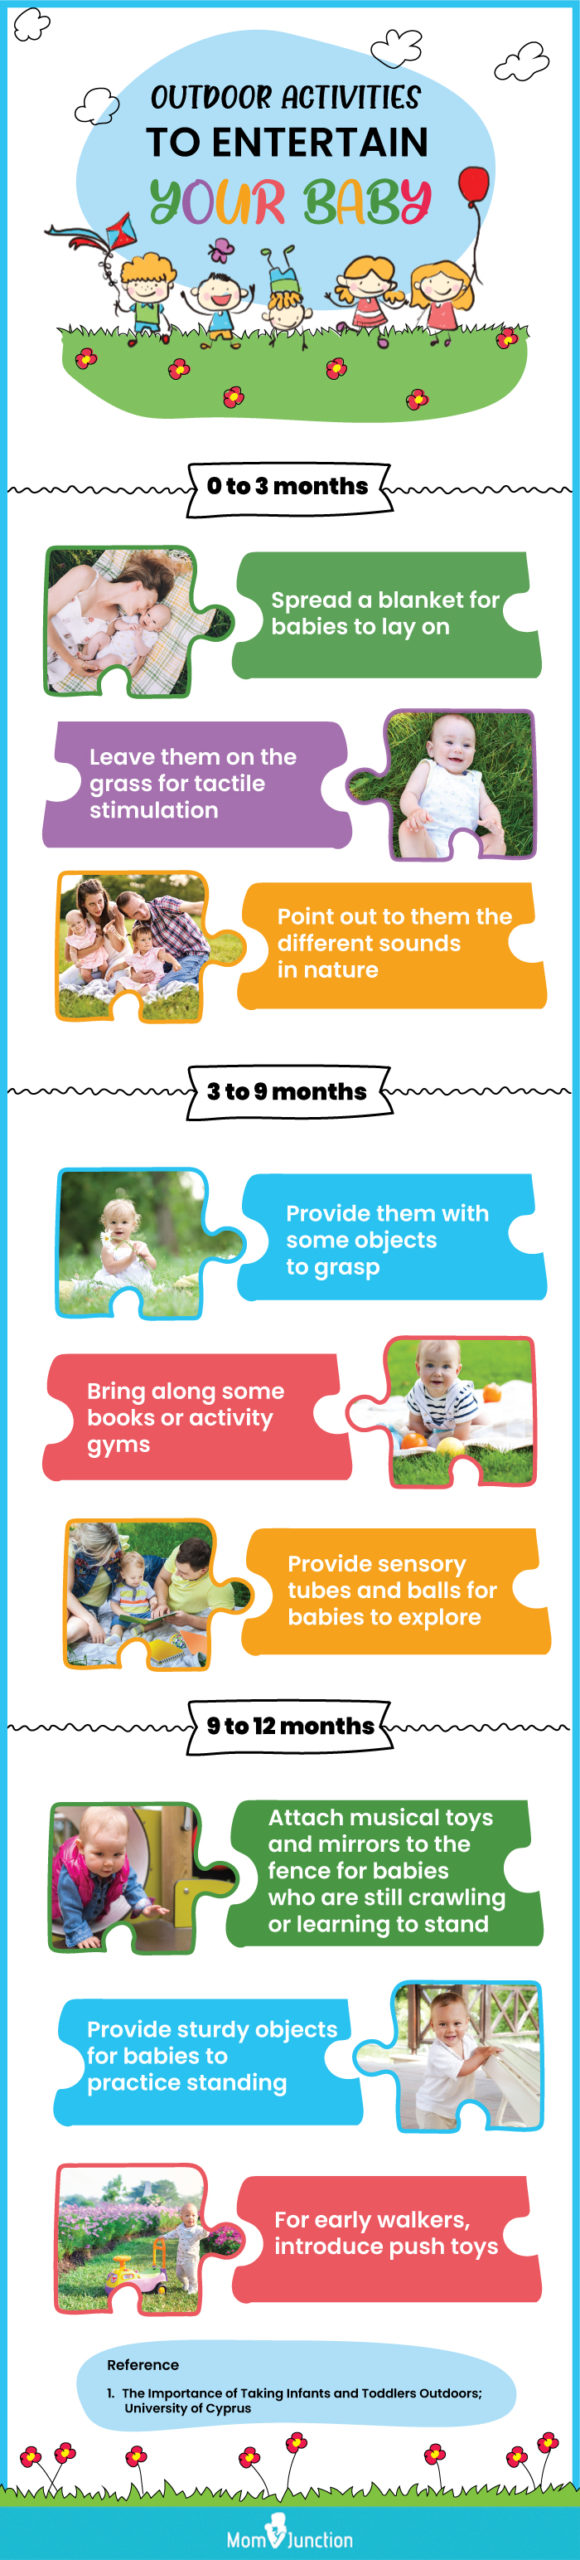 outdor activitiesto entertain your baby (infographic)